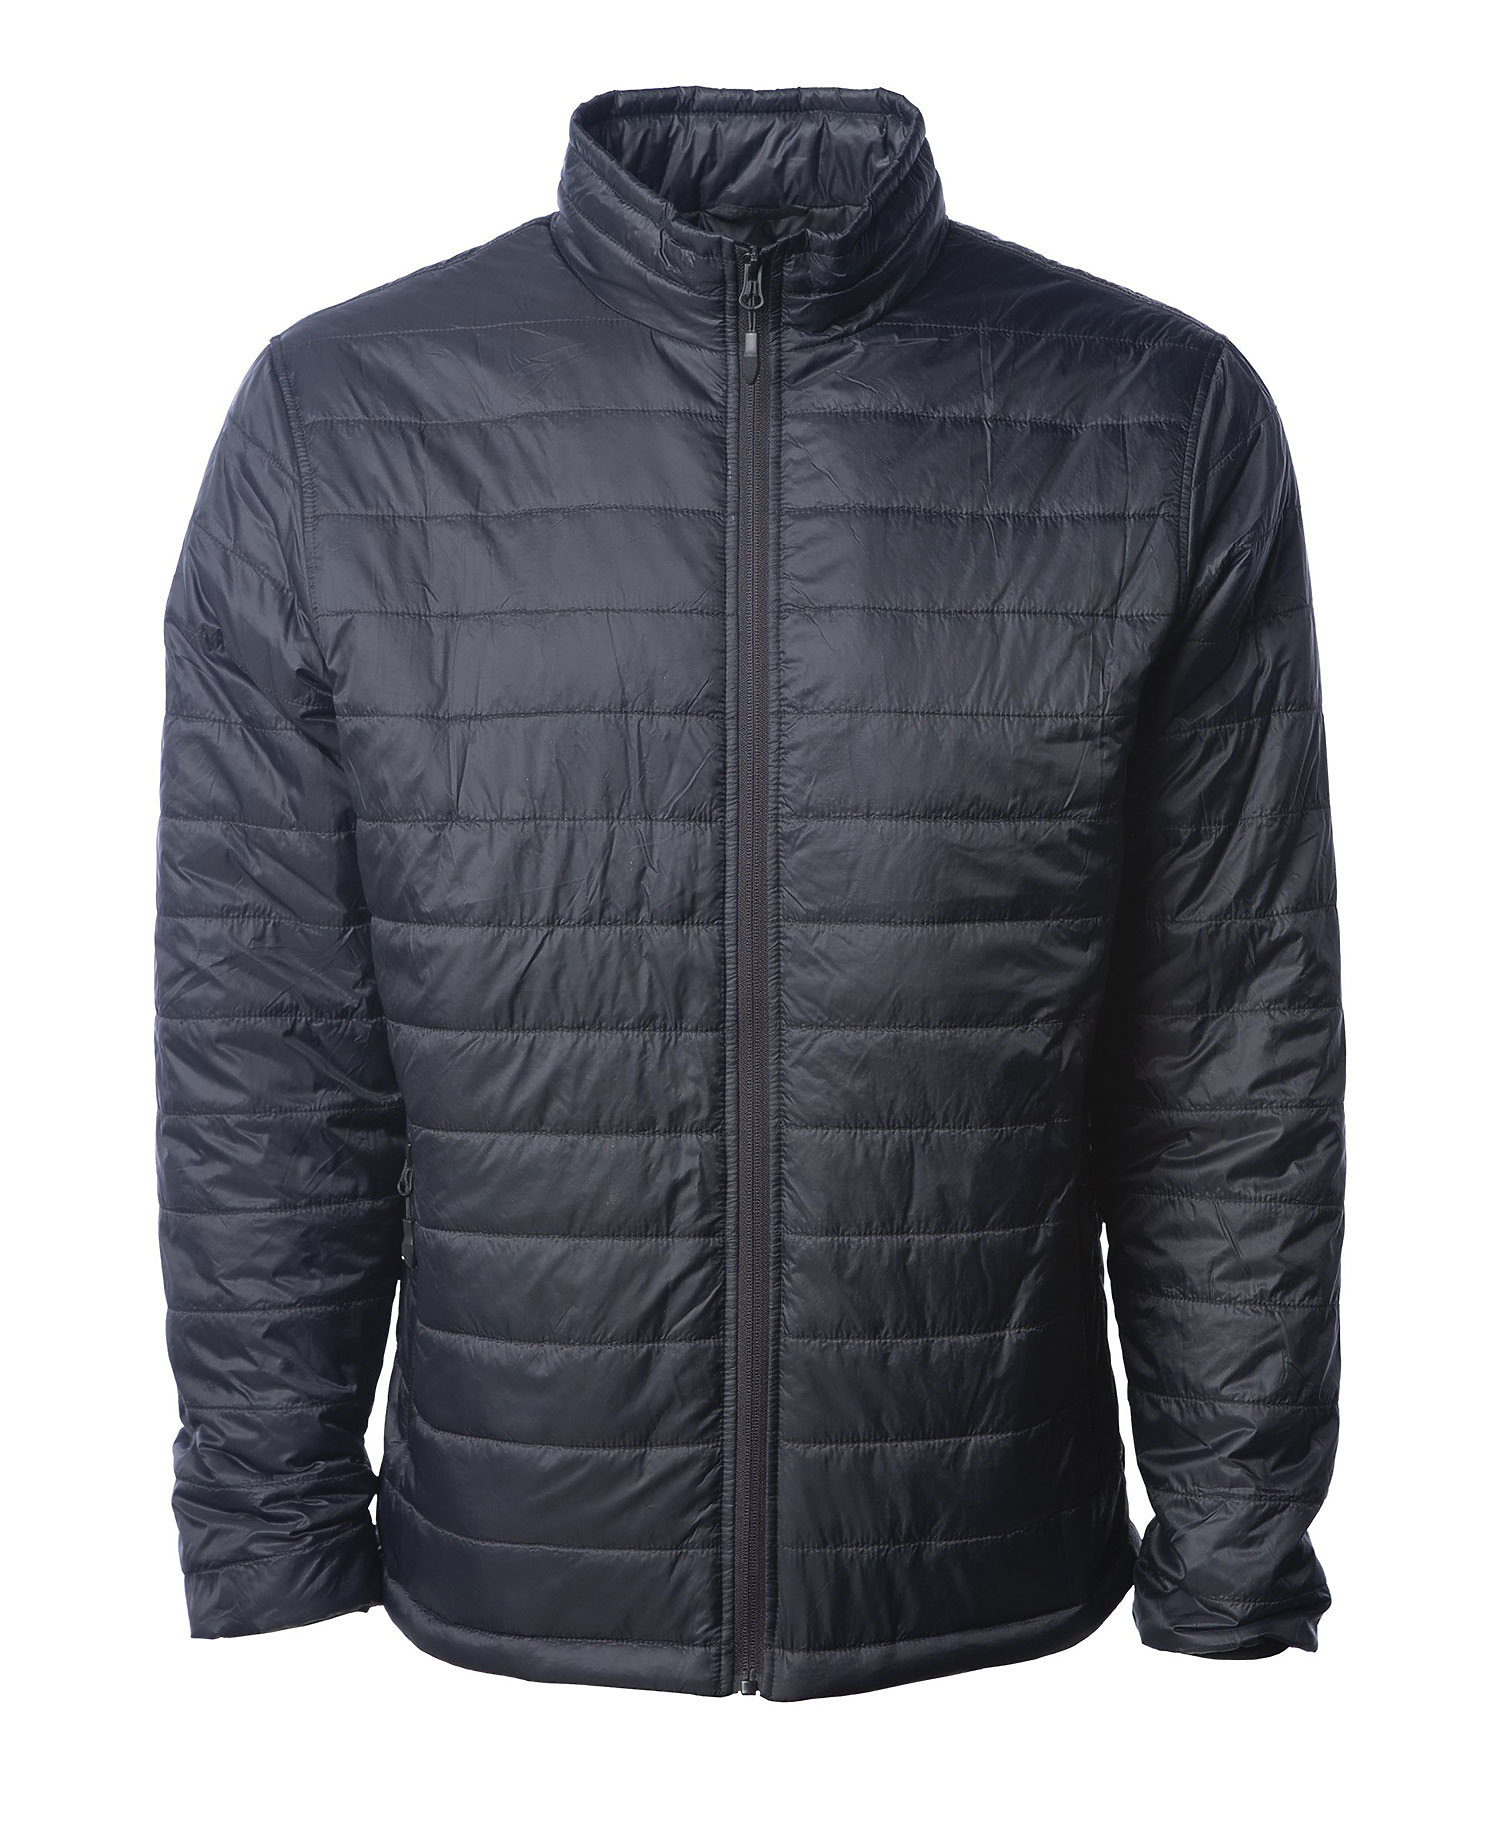 Independent Trading Co. EXP100PFZ - Men's Puffer Jacket